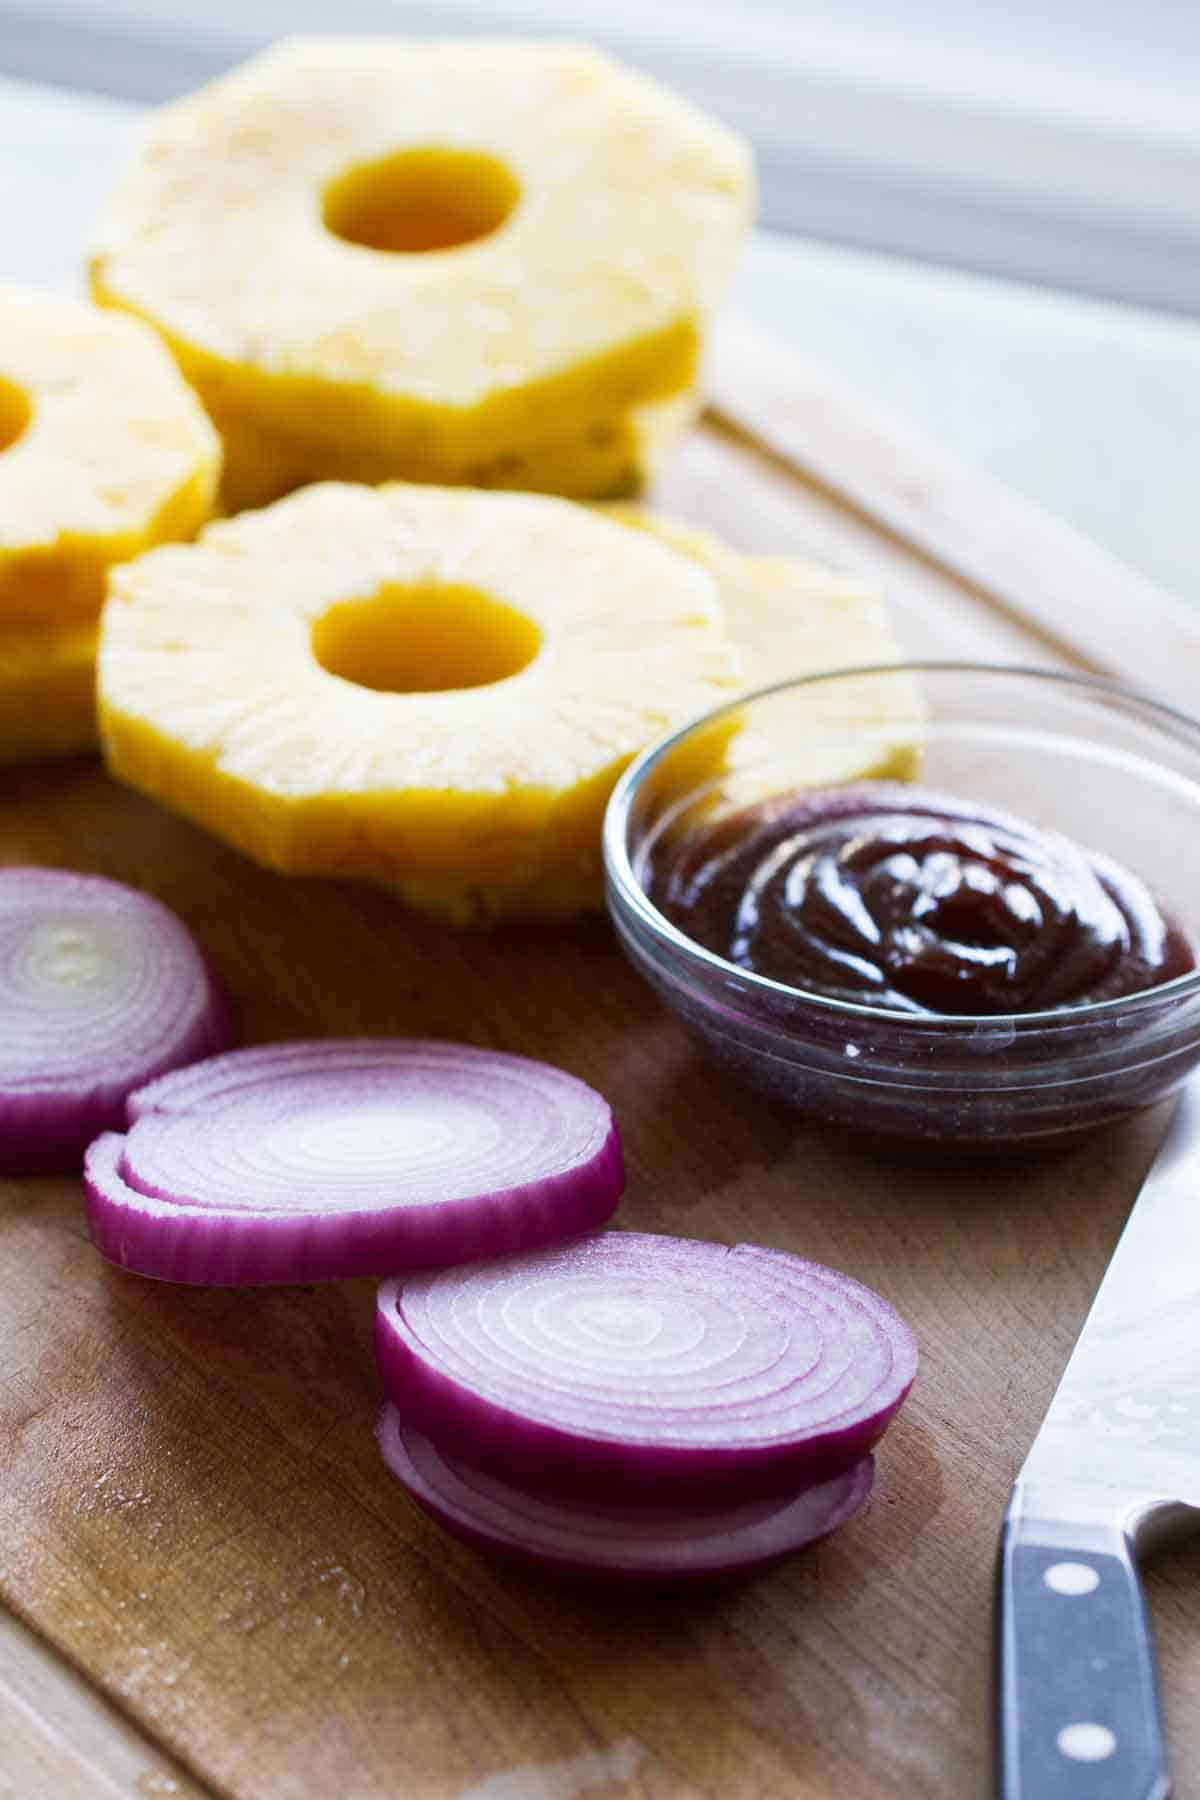 pineapple, onion, and barbecue sauce for Hawaiian Hot Dogs